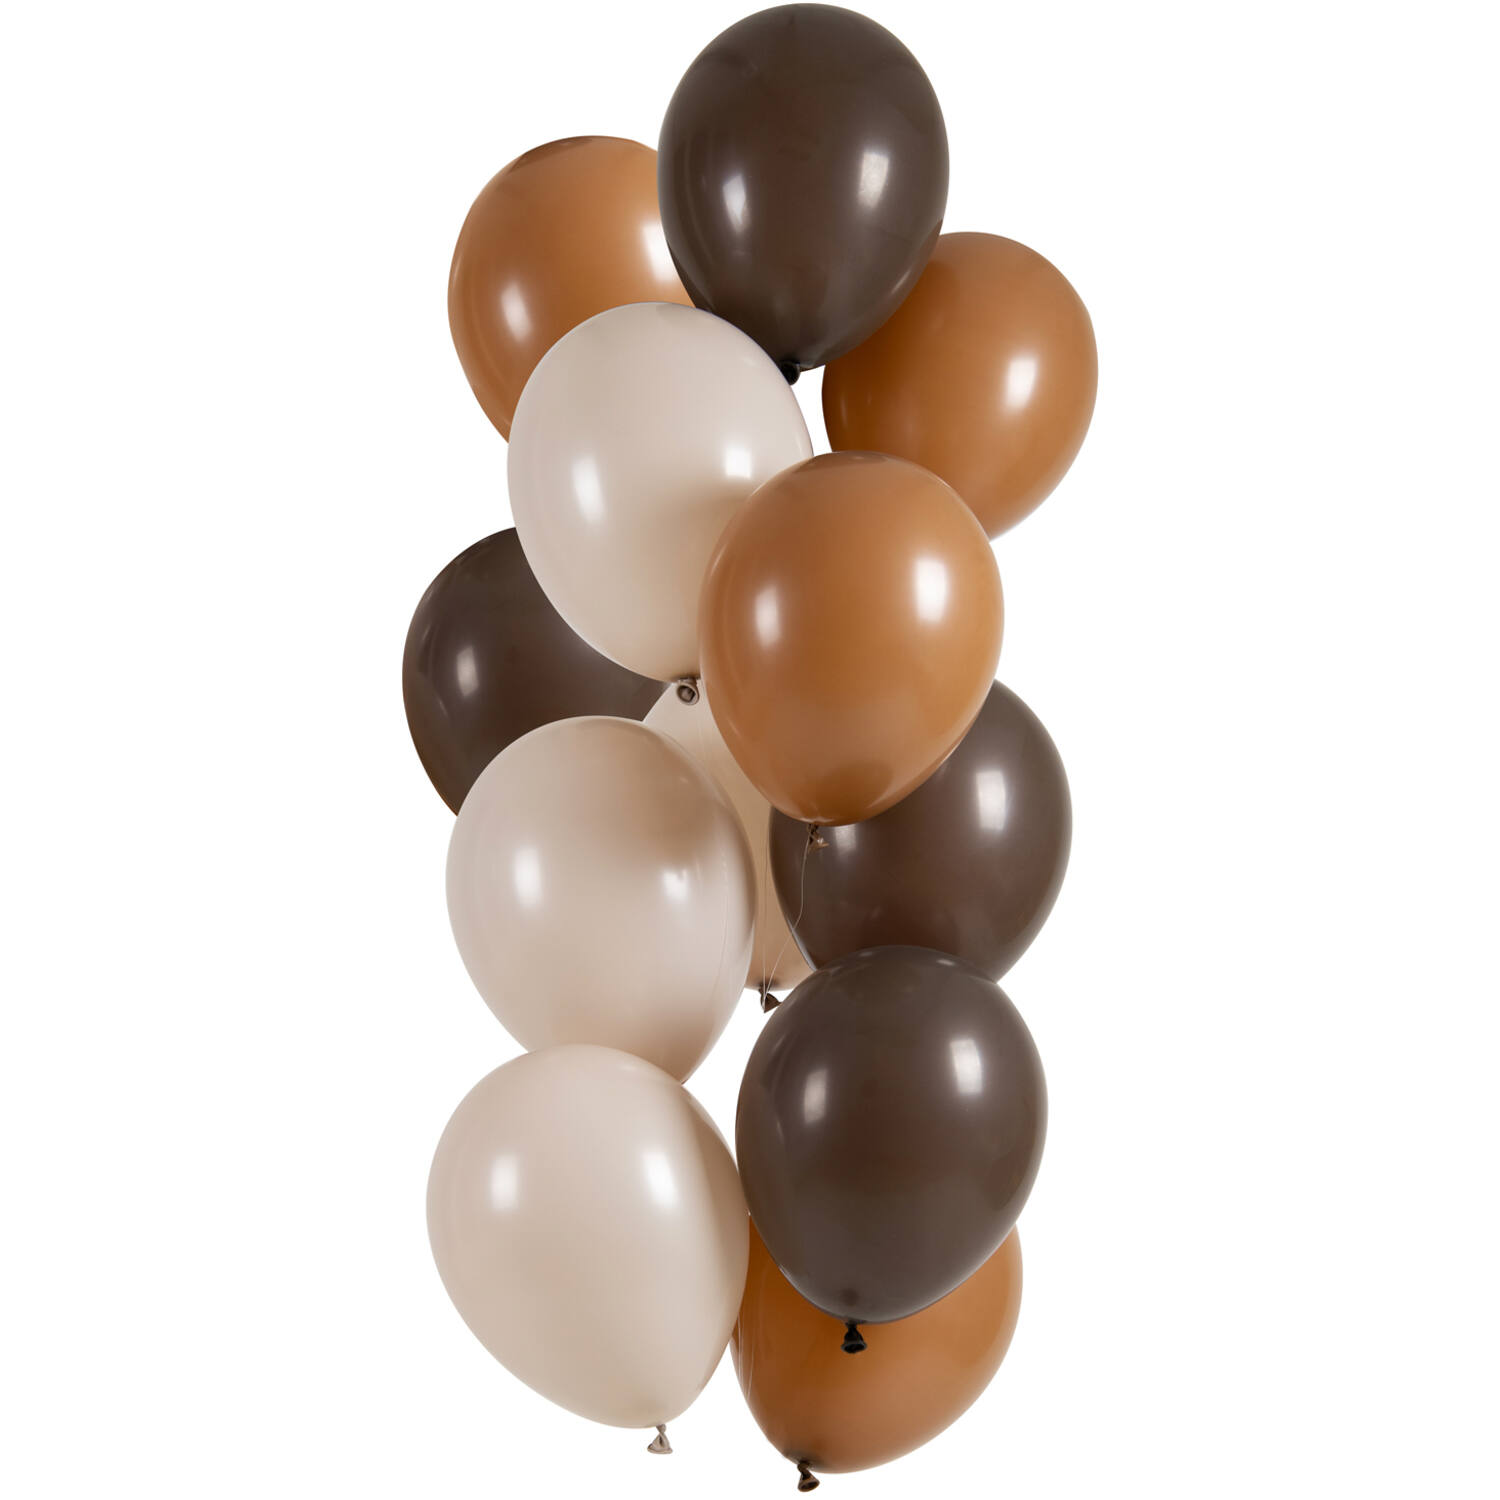 Ballons Mocca, Choco, Vanille - 12 Stck